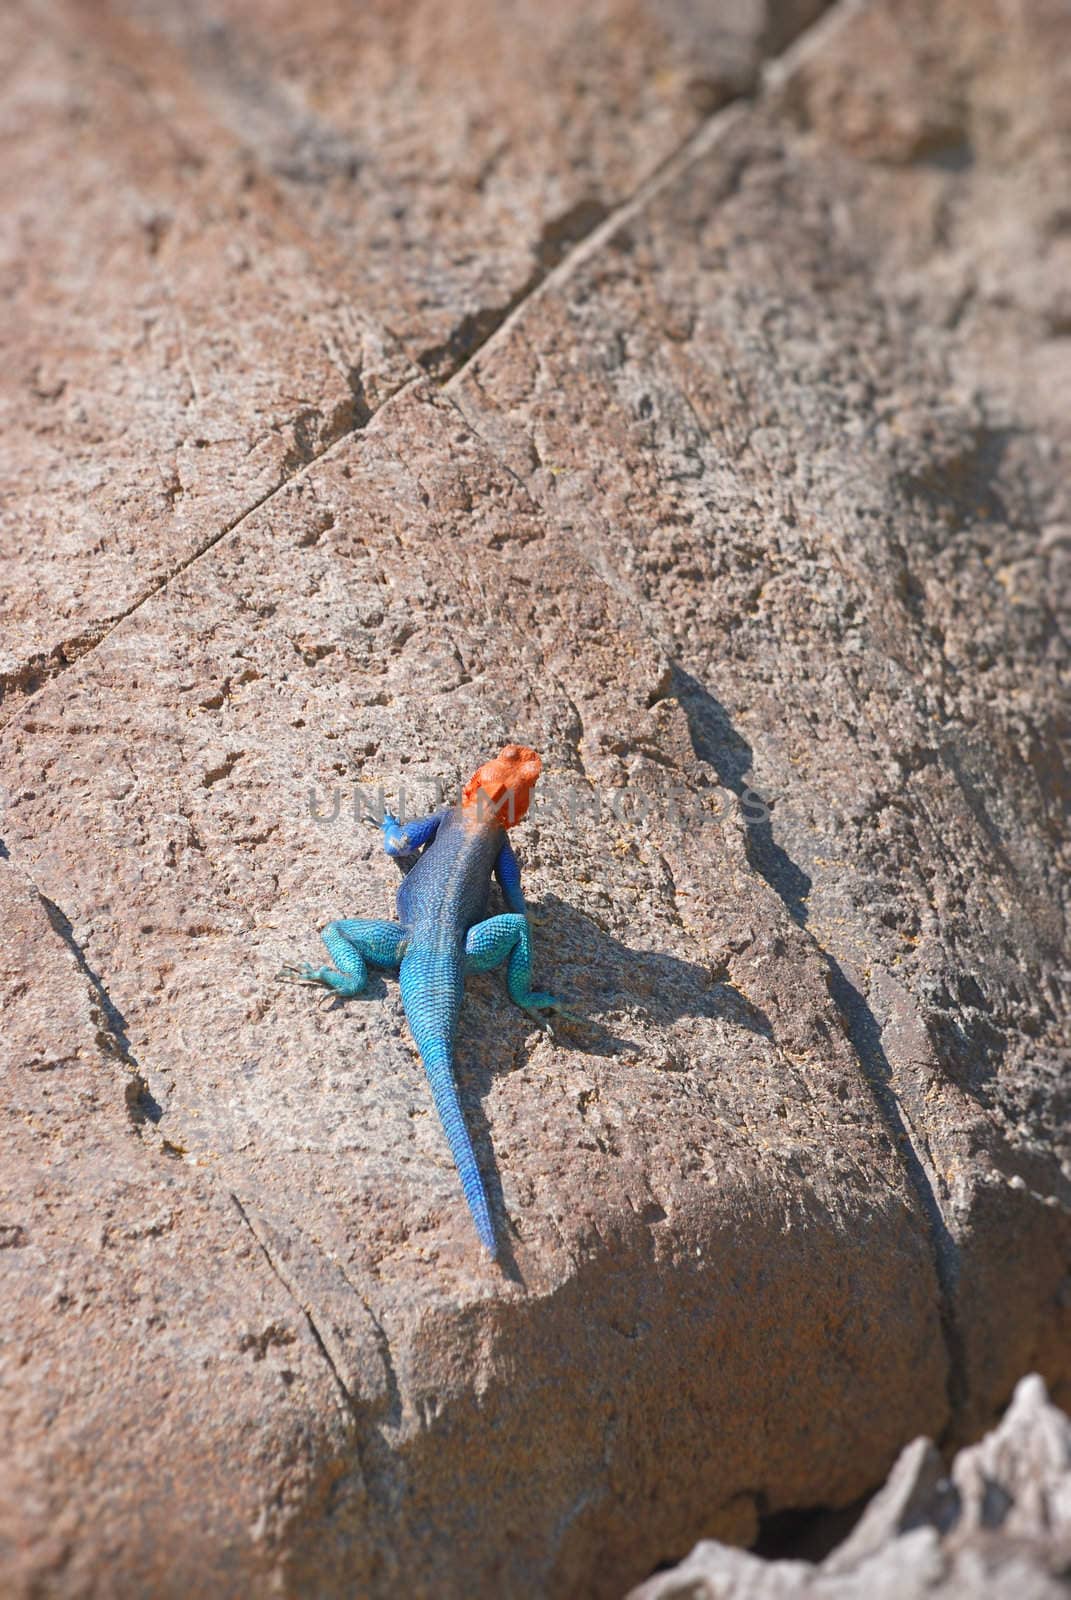 Red-headed rock agama in the sun on a stone.